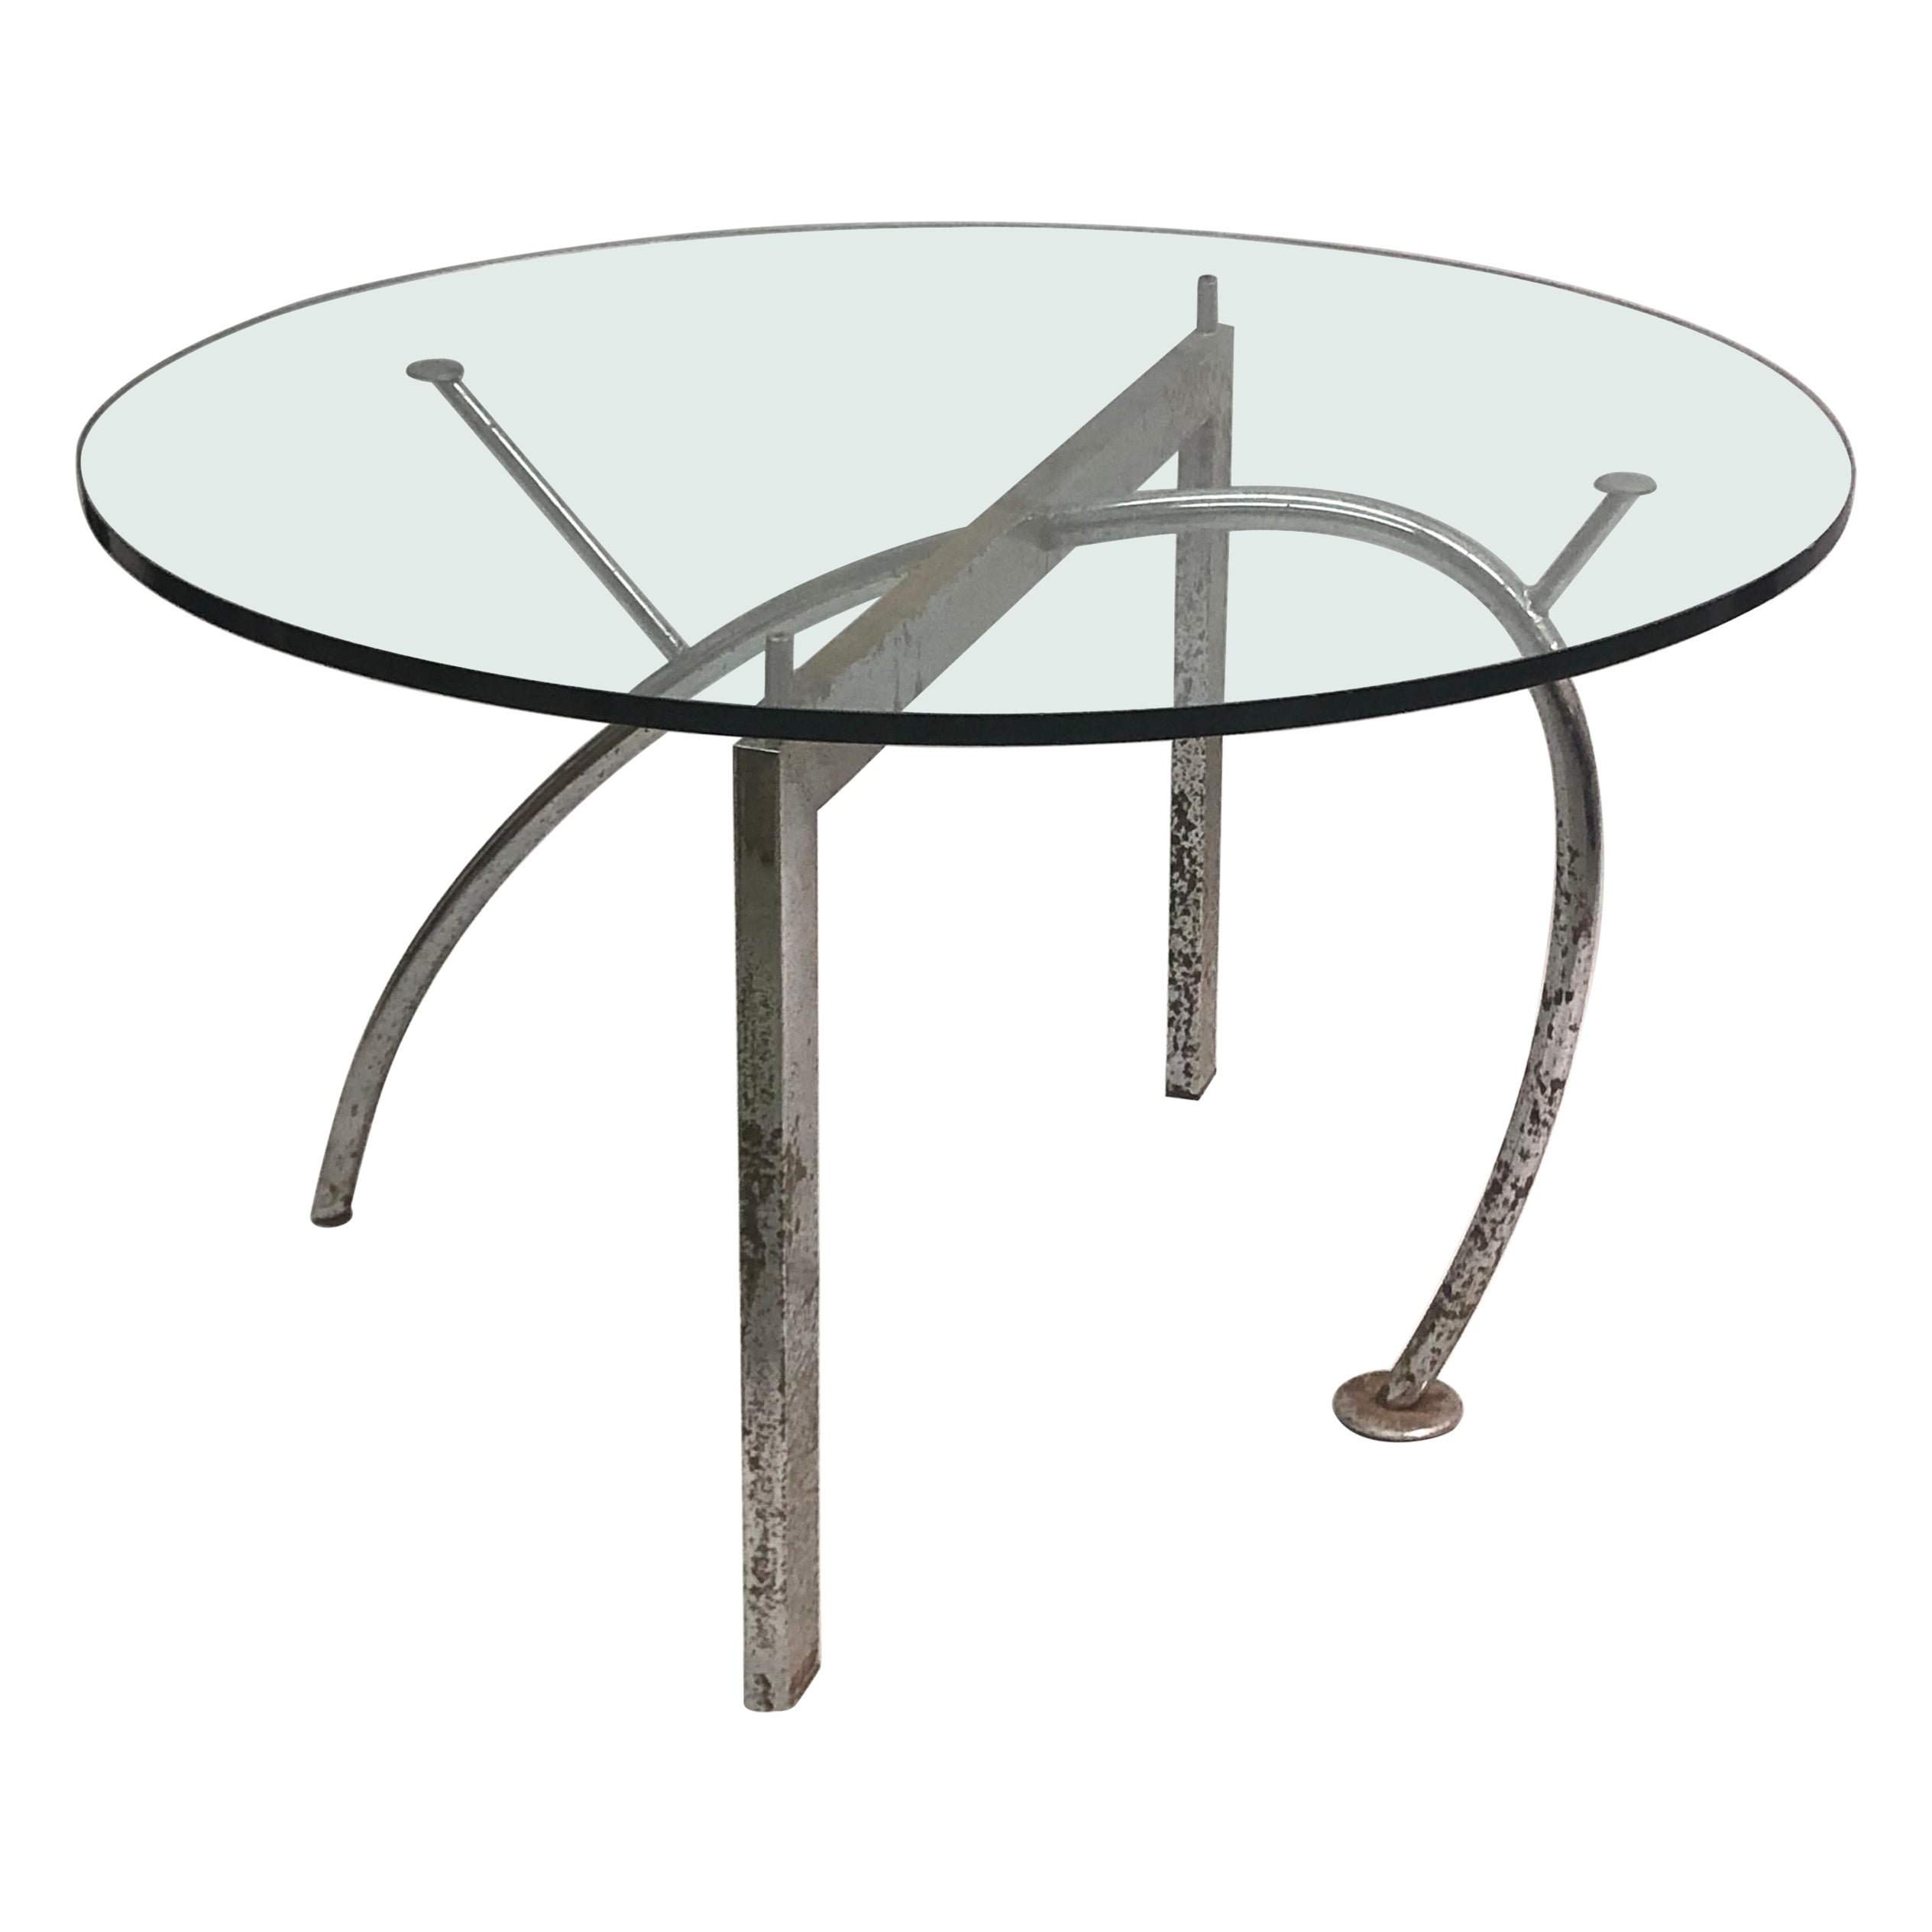 Italian Post Modern Round Dining Table Prototype by Massimo Iosa Ghini